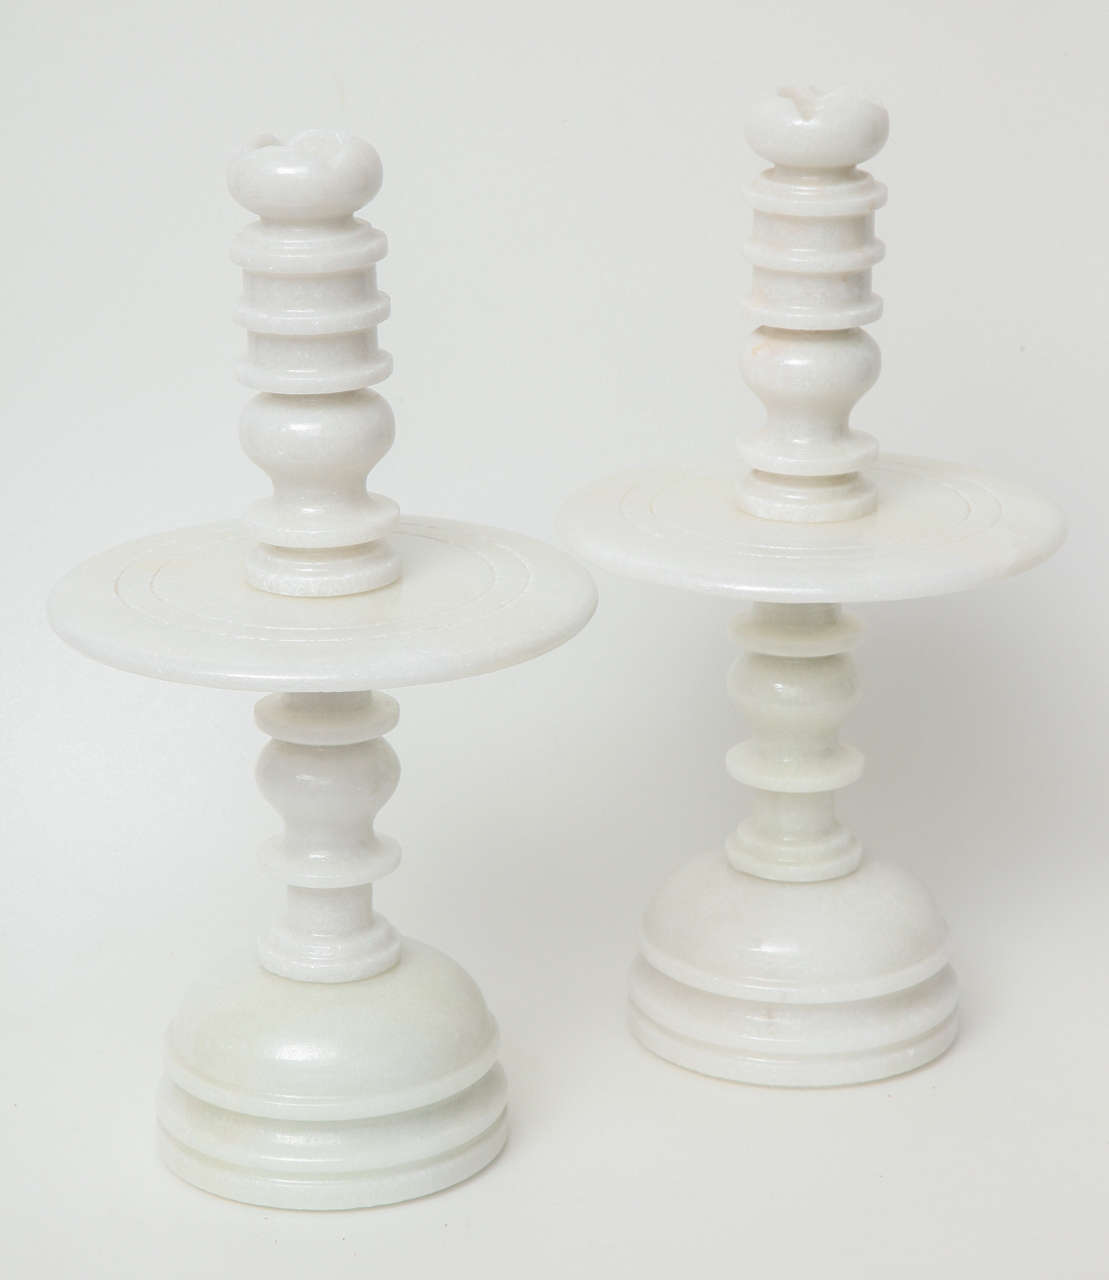 A white stone candlestick from Vietnam. Sold separately.